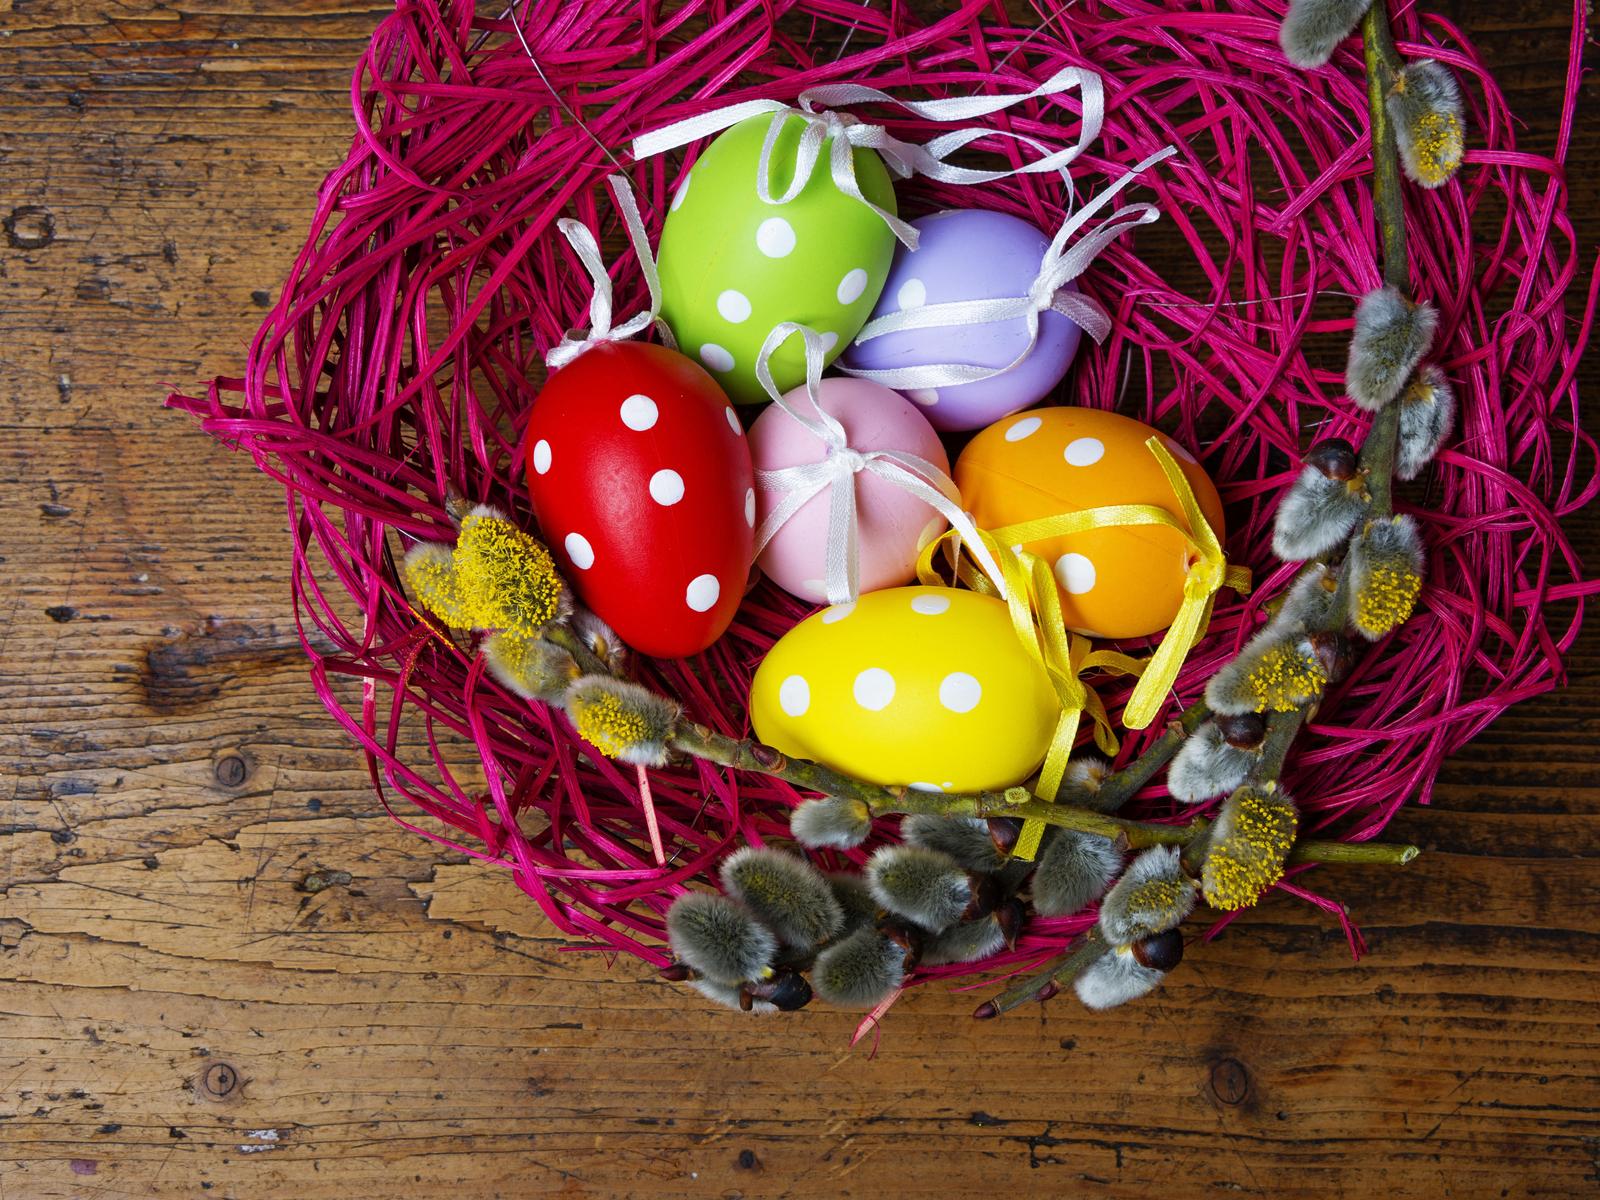 Purple basket with Easter eggs spring Holidays